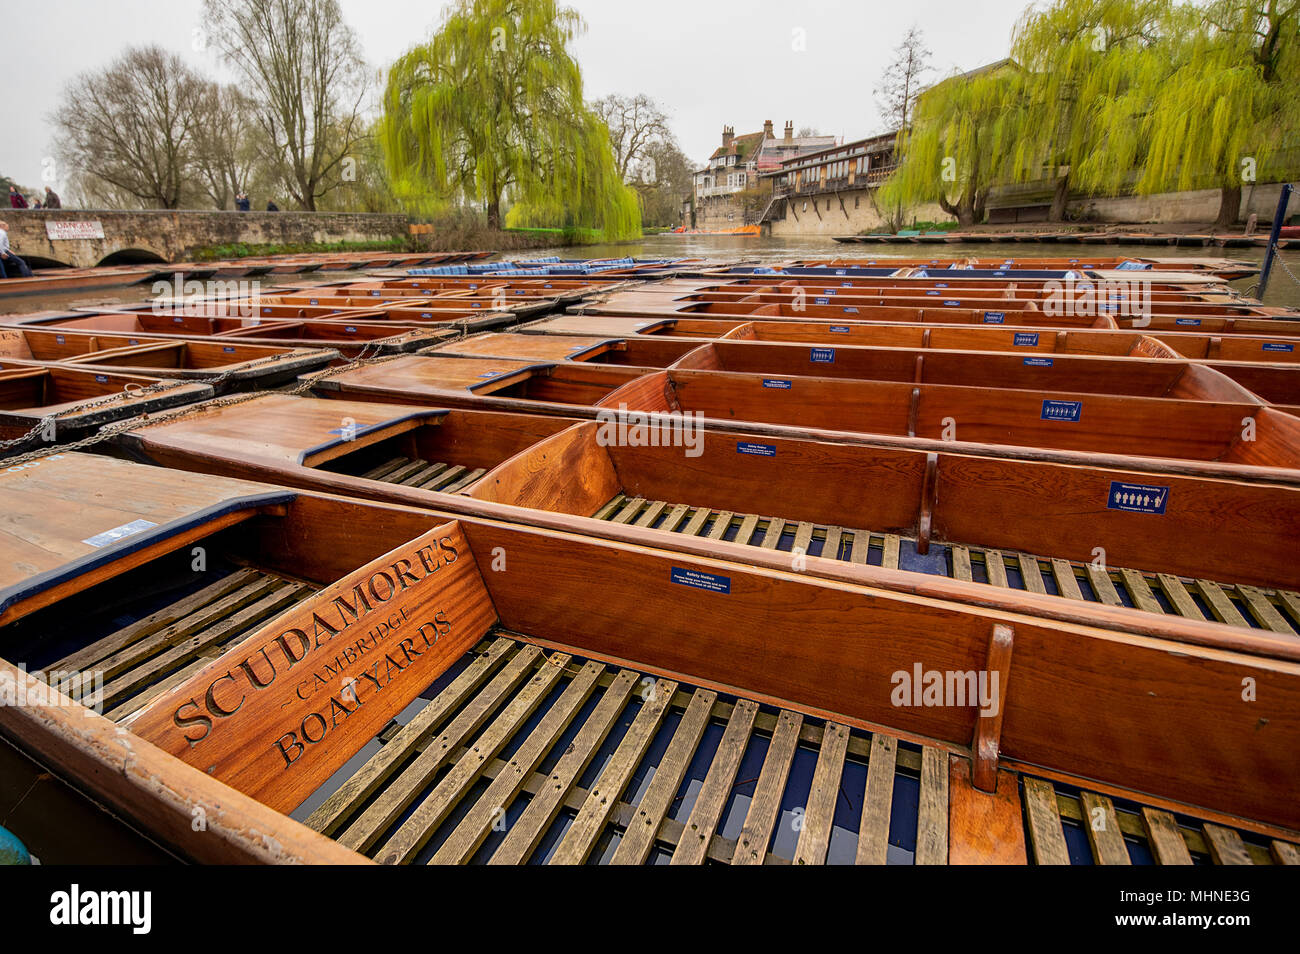 Rows of moorded up wooden punts used to transport tourists sightseeing trips operated by Scudamore's on the River Cam, Cambridge, UK. Stock Photo